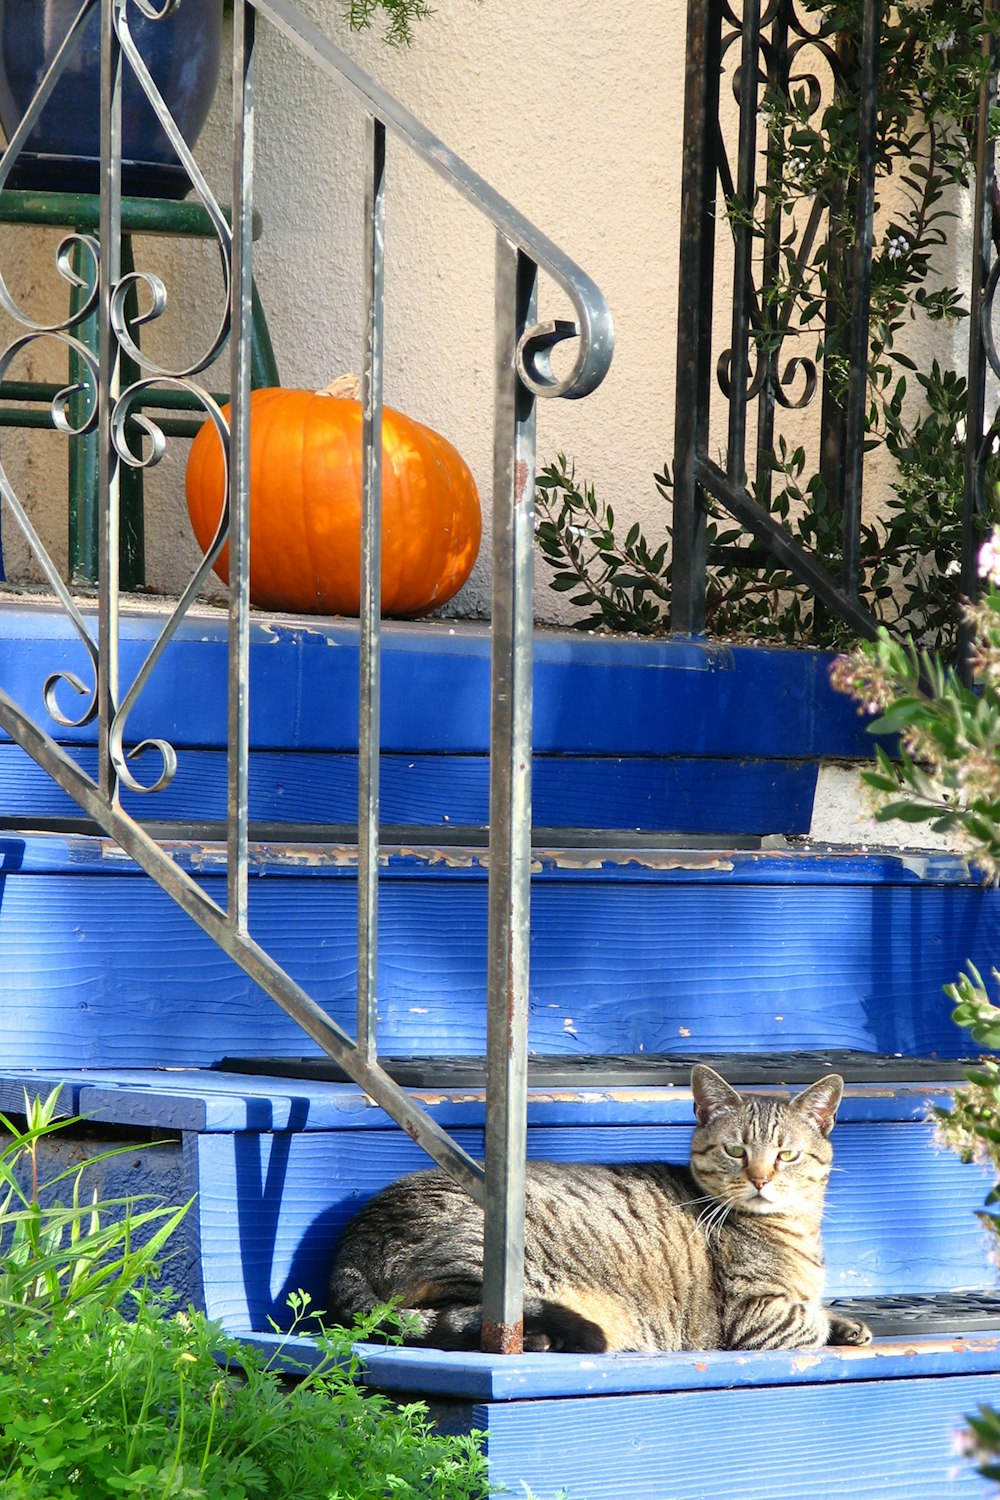 a cat sitting on a blue bench